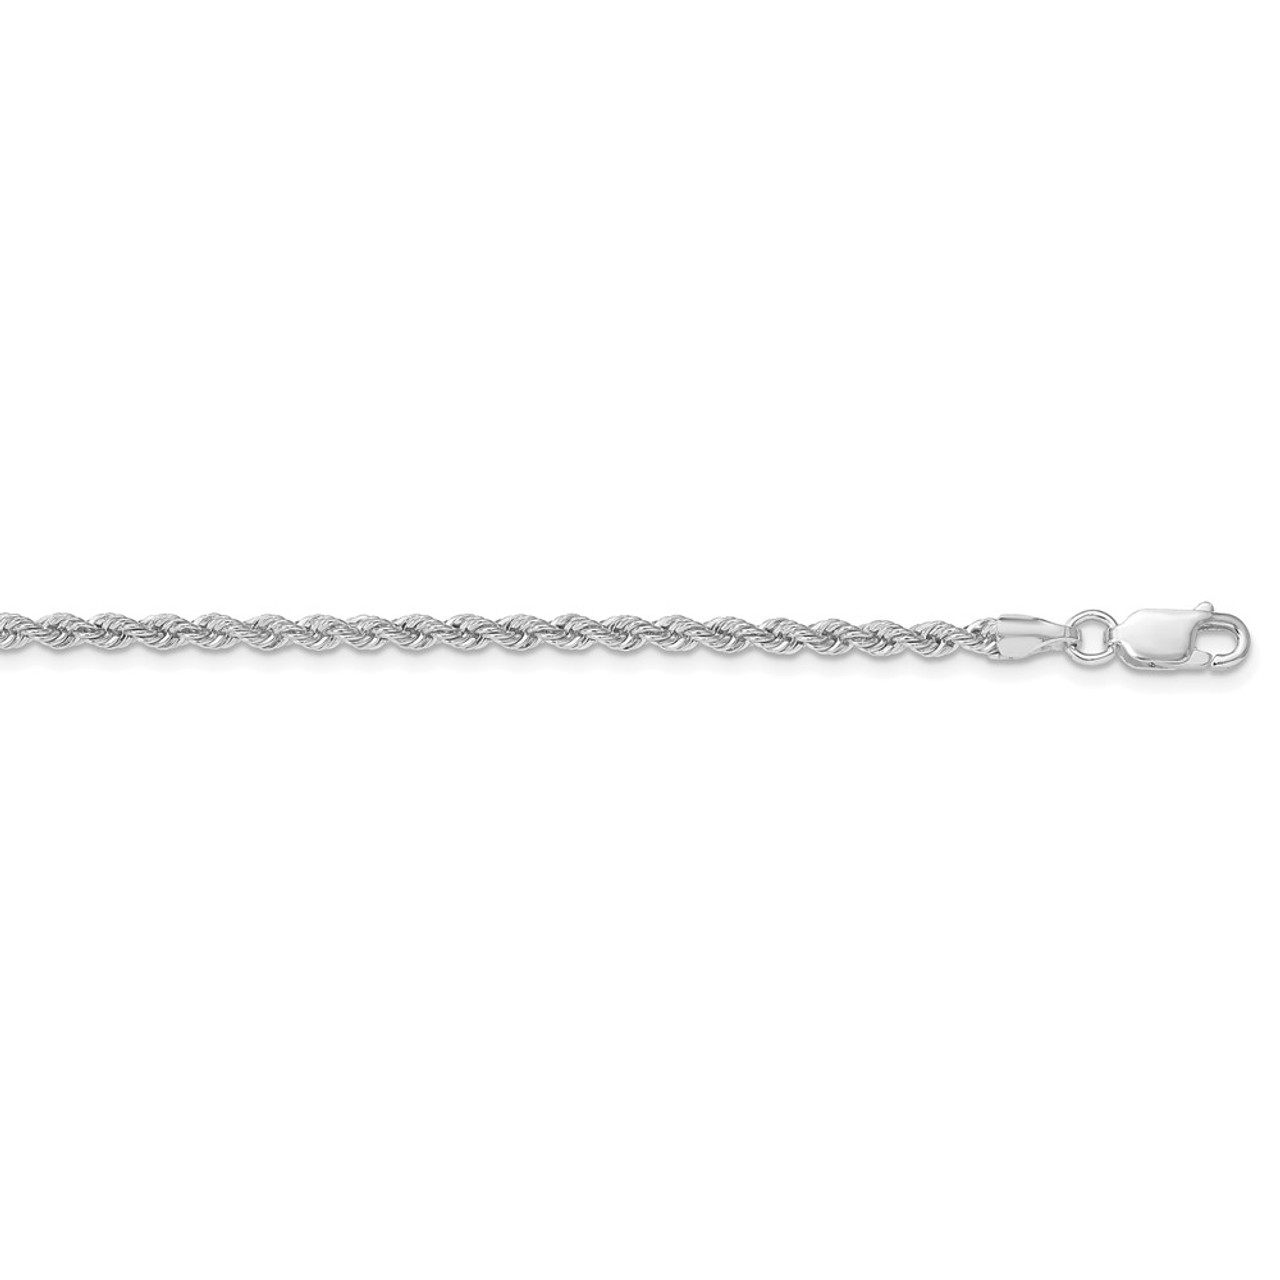 Rope Chain Necklace Sterling Silver Diamond Cut White Gold Look